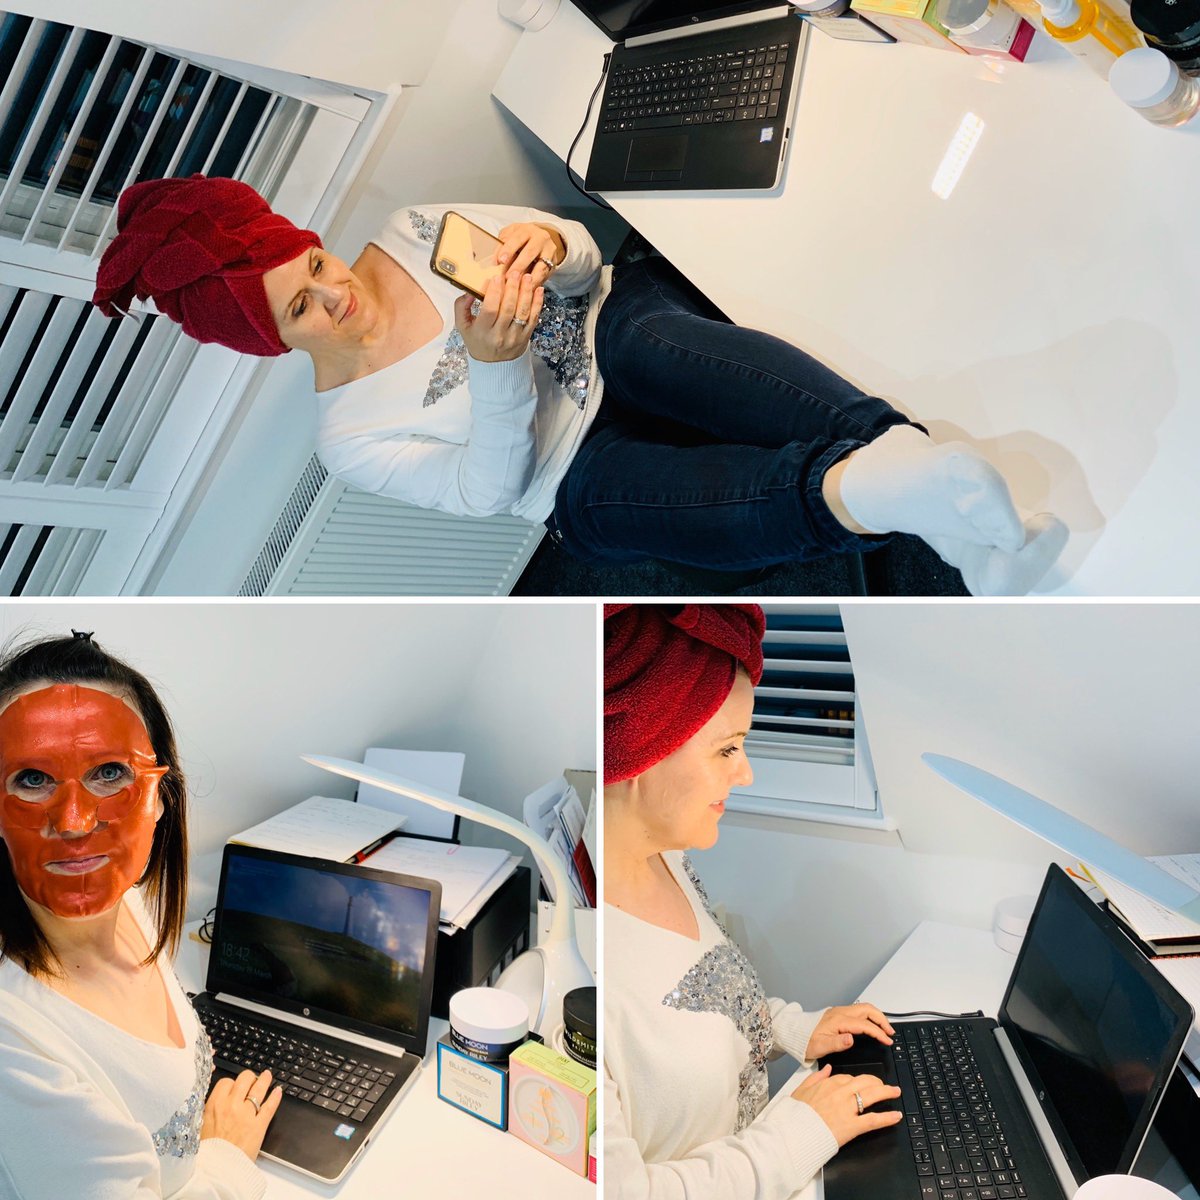 Happy Tuesday and thought I would share my tips on working from home. These are the skin expert tips on working from home #multitasking #StayAtHome #facemask #hairmask #footcream #noneedforperdicure #workfromhome #skinexpert